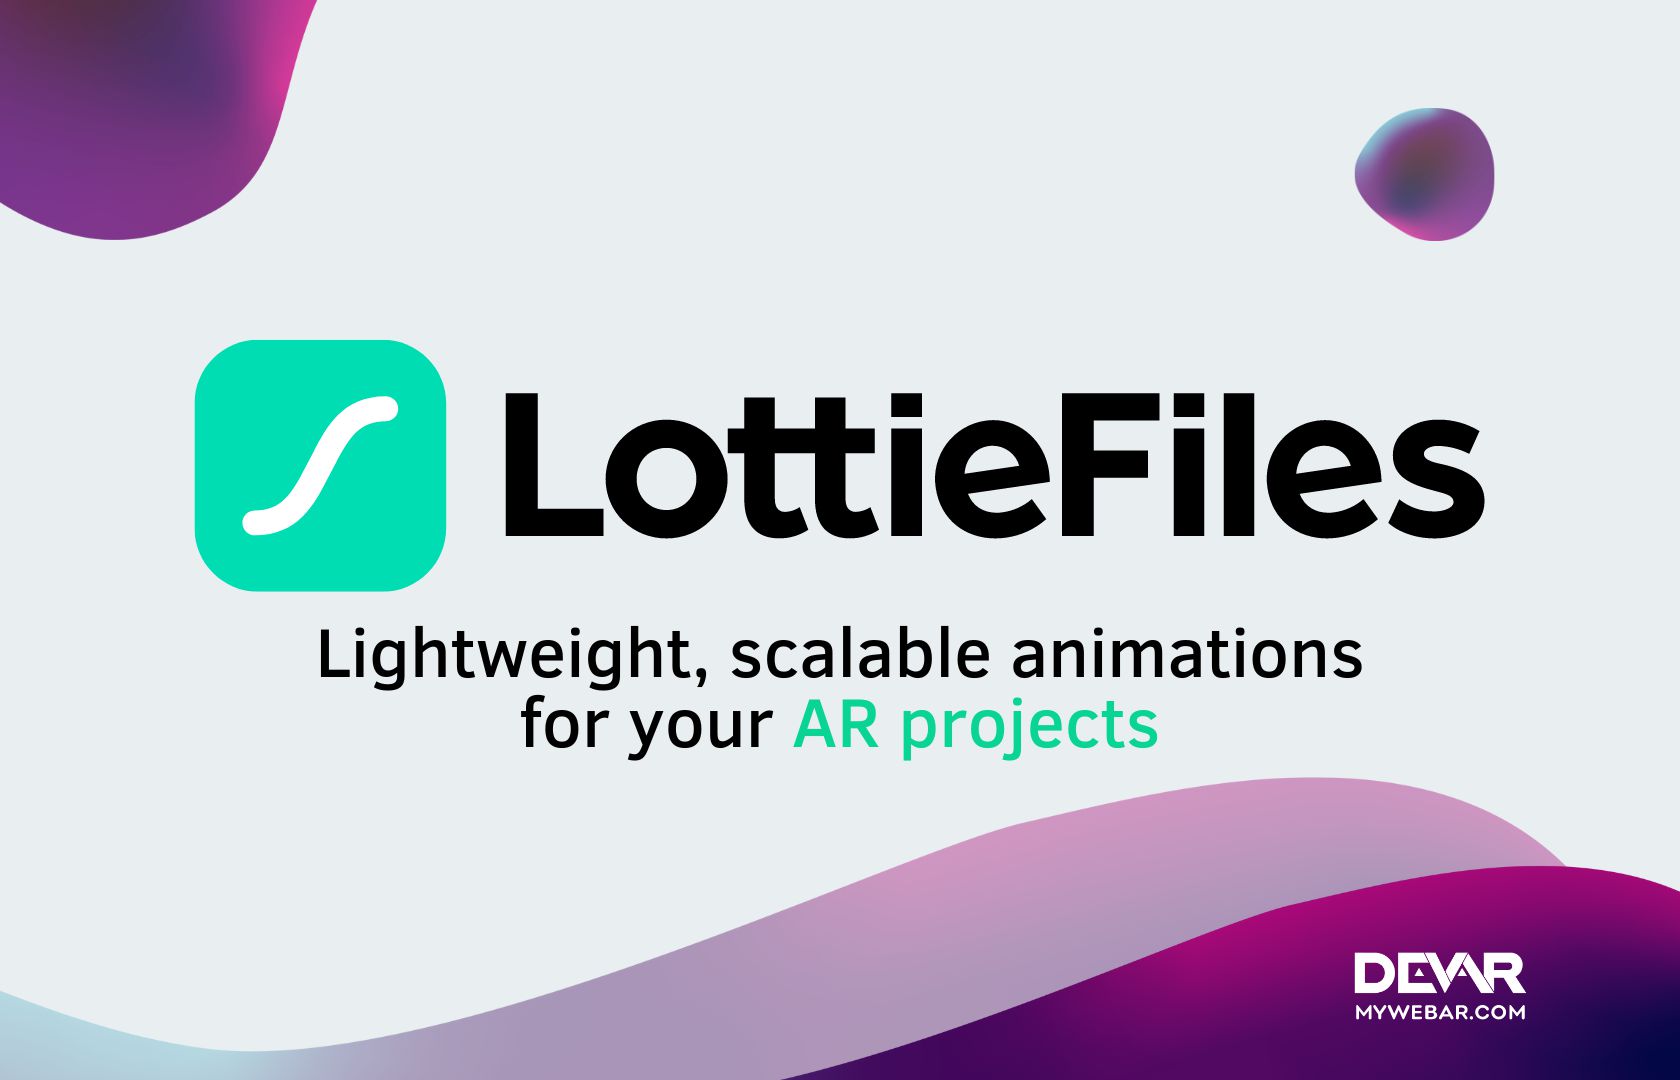 Add lightweight, scalable animation to your AR project with Lottie Animation!